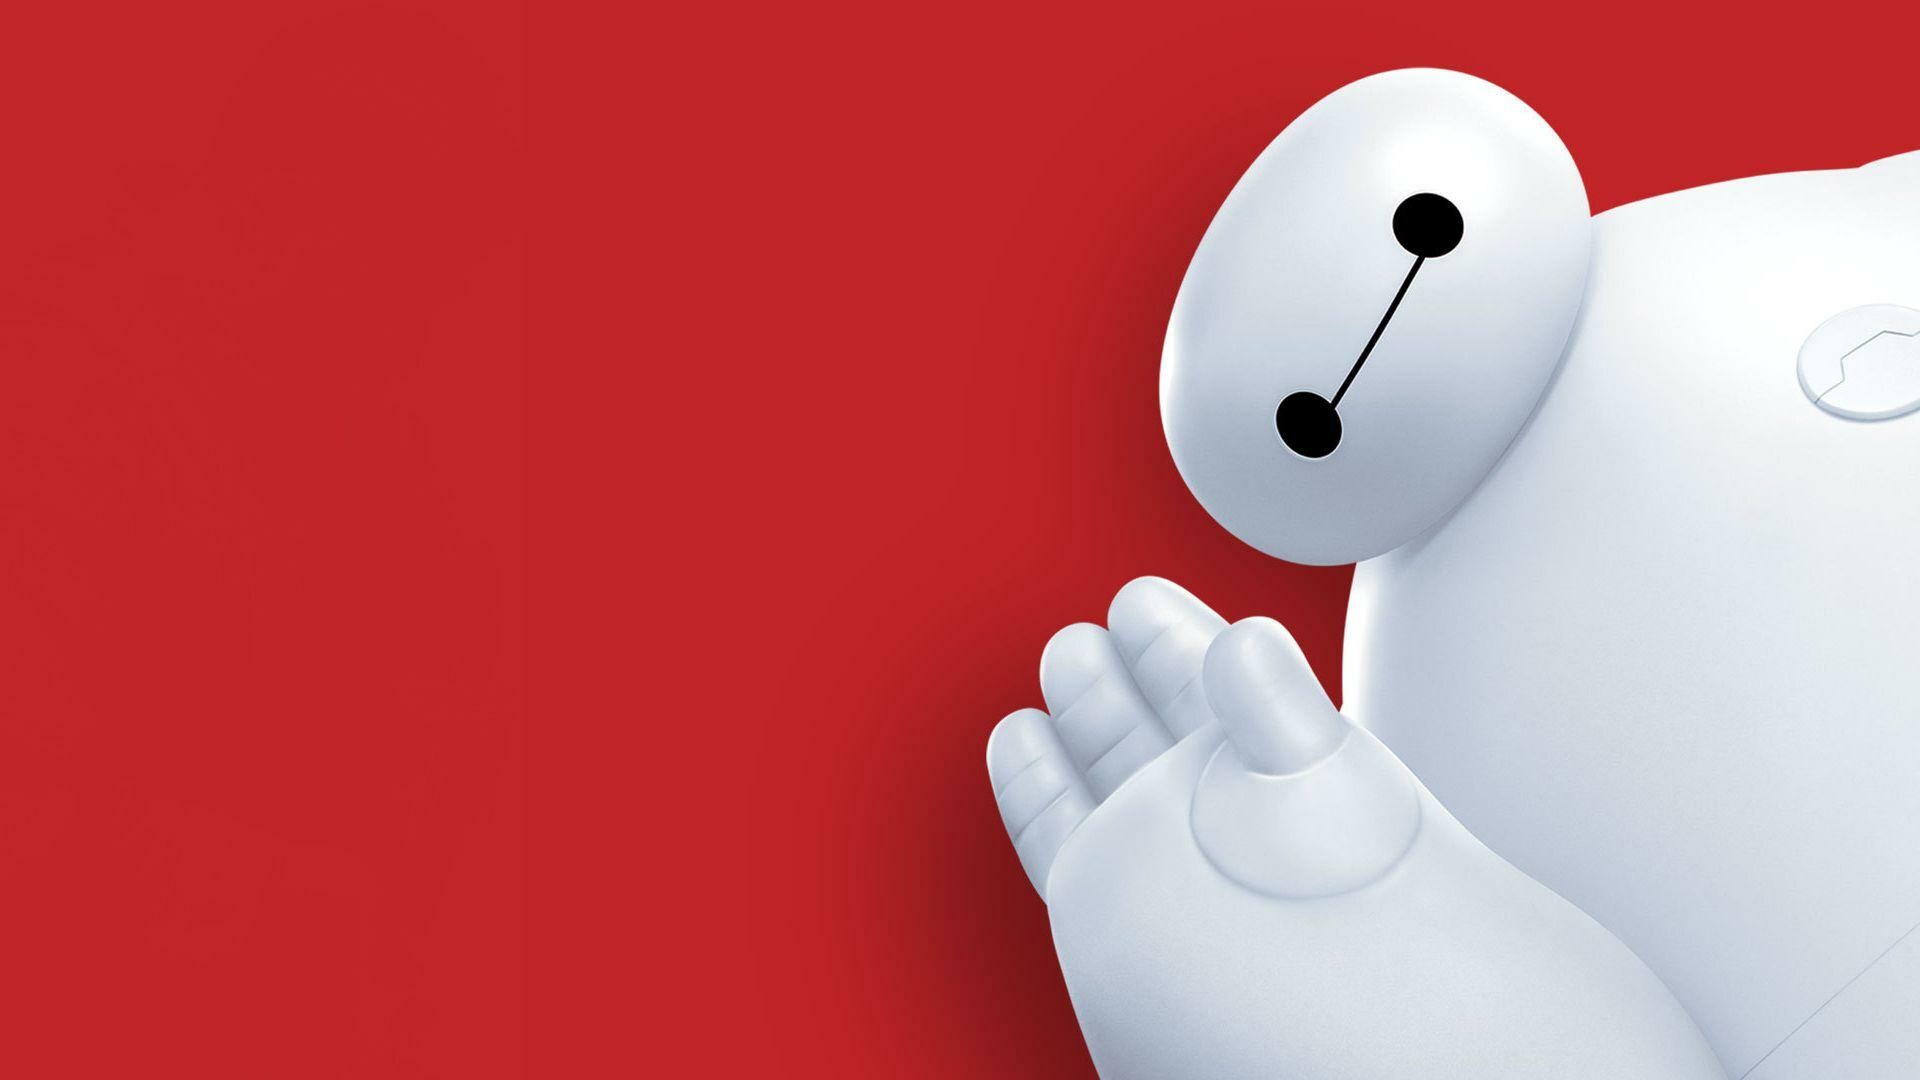 Big Hero 6: Scott Adsit as Baymax, an inflatable robot built by Tadashi as a medical assistant. 1920x1080 Full HD Wallpaper.